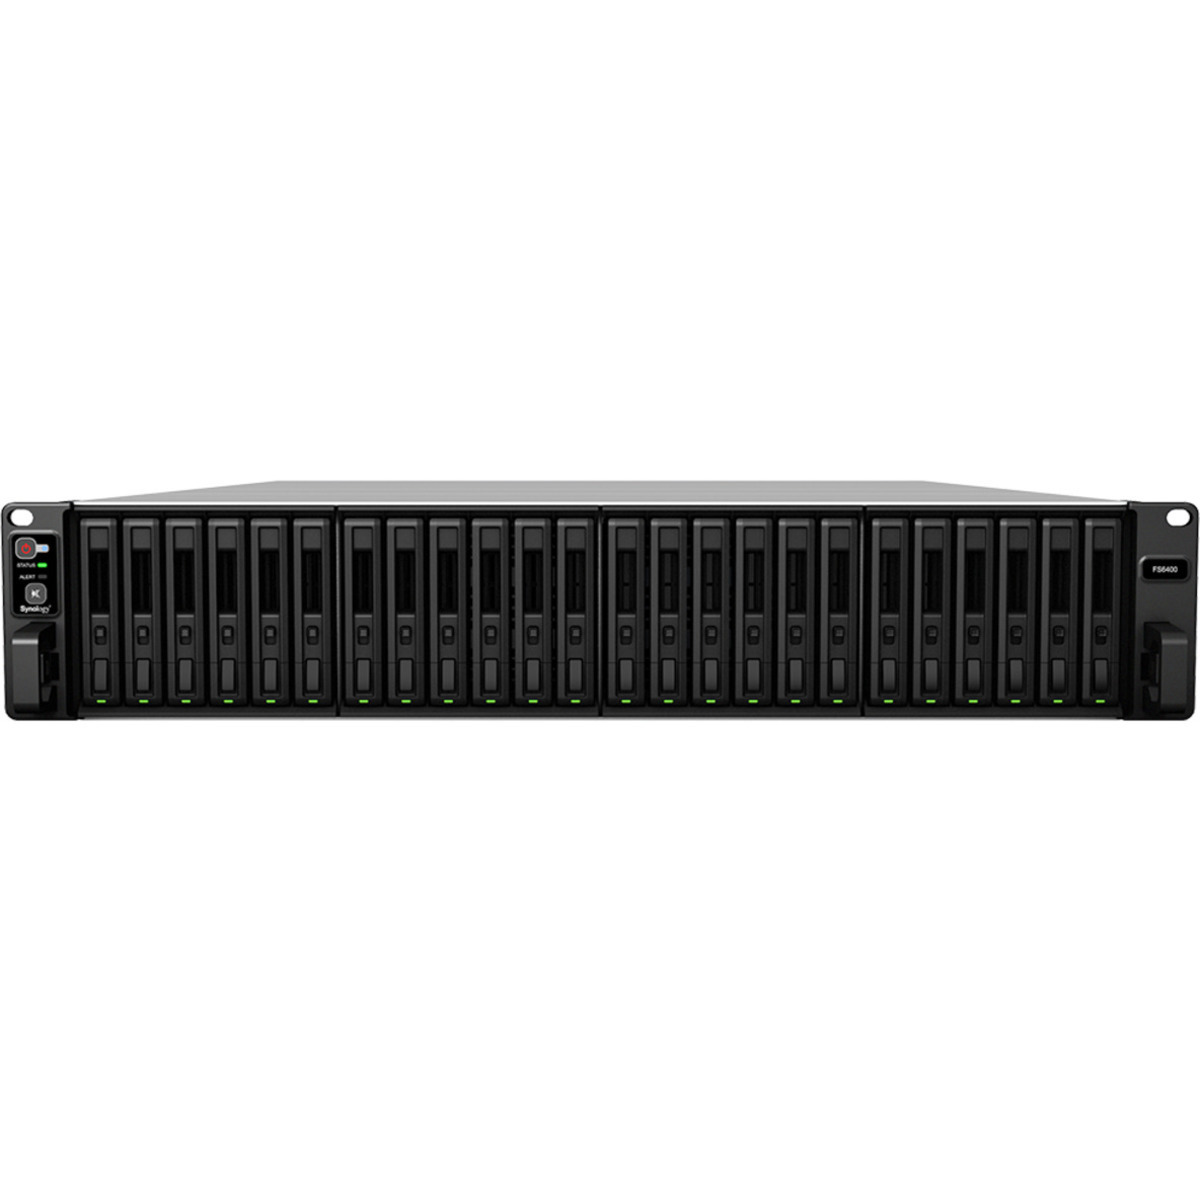 Synology FlashStation FS6400 18tb 24-Bay RackMount Large Business / Enterprise NAS - Network Attached Storage Device 18x1tb Samsung 870 EVO MZ-77E1T0BAM 2.5 560/530MB/s SATA 6Gb/s SSD CONSUMER Class Drives Installed - Burn-In Tested FlashStation FS6400